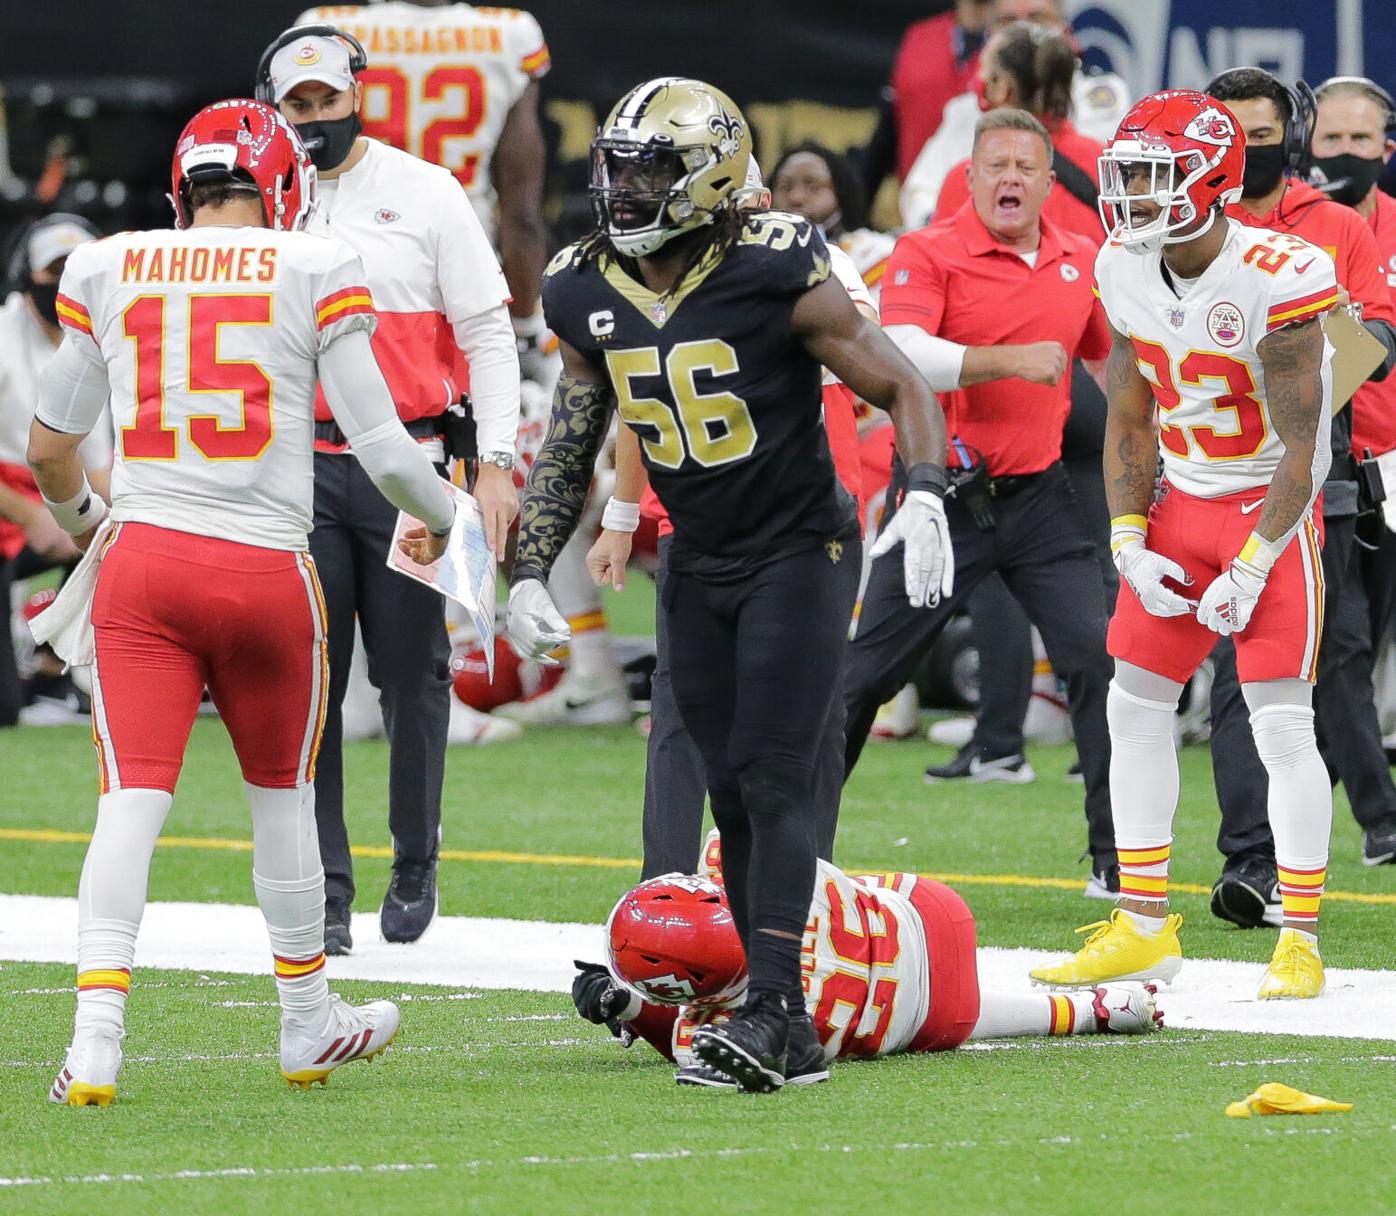 San Francisco 49ers vs. New Orleans Saints Live Stream: How To Watch NFL  Week 9 For Free